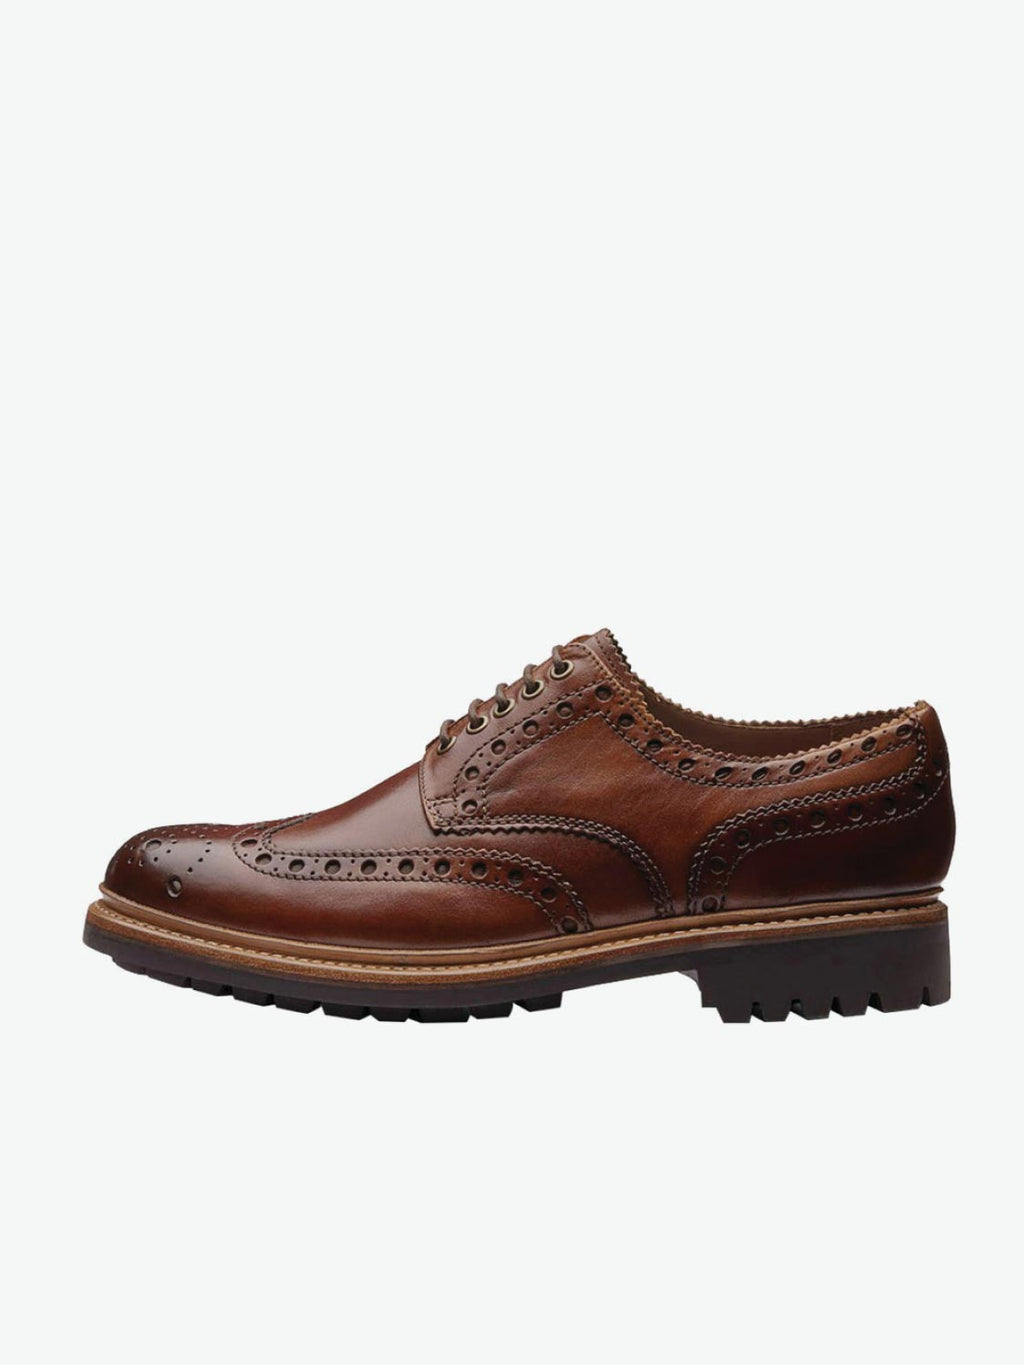 Grenson Archie Goodyear Tan Oxford Brogue Leather Shoes | The Project Garments - A